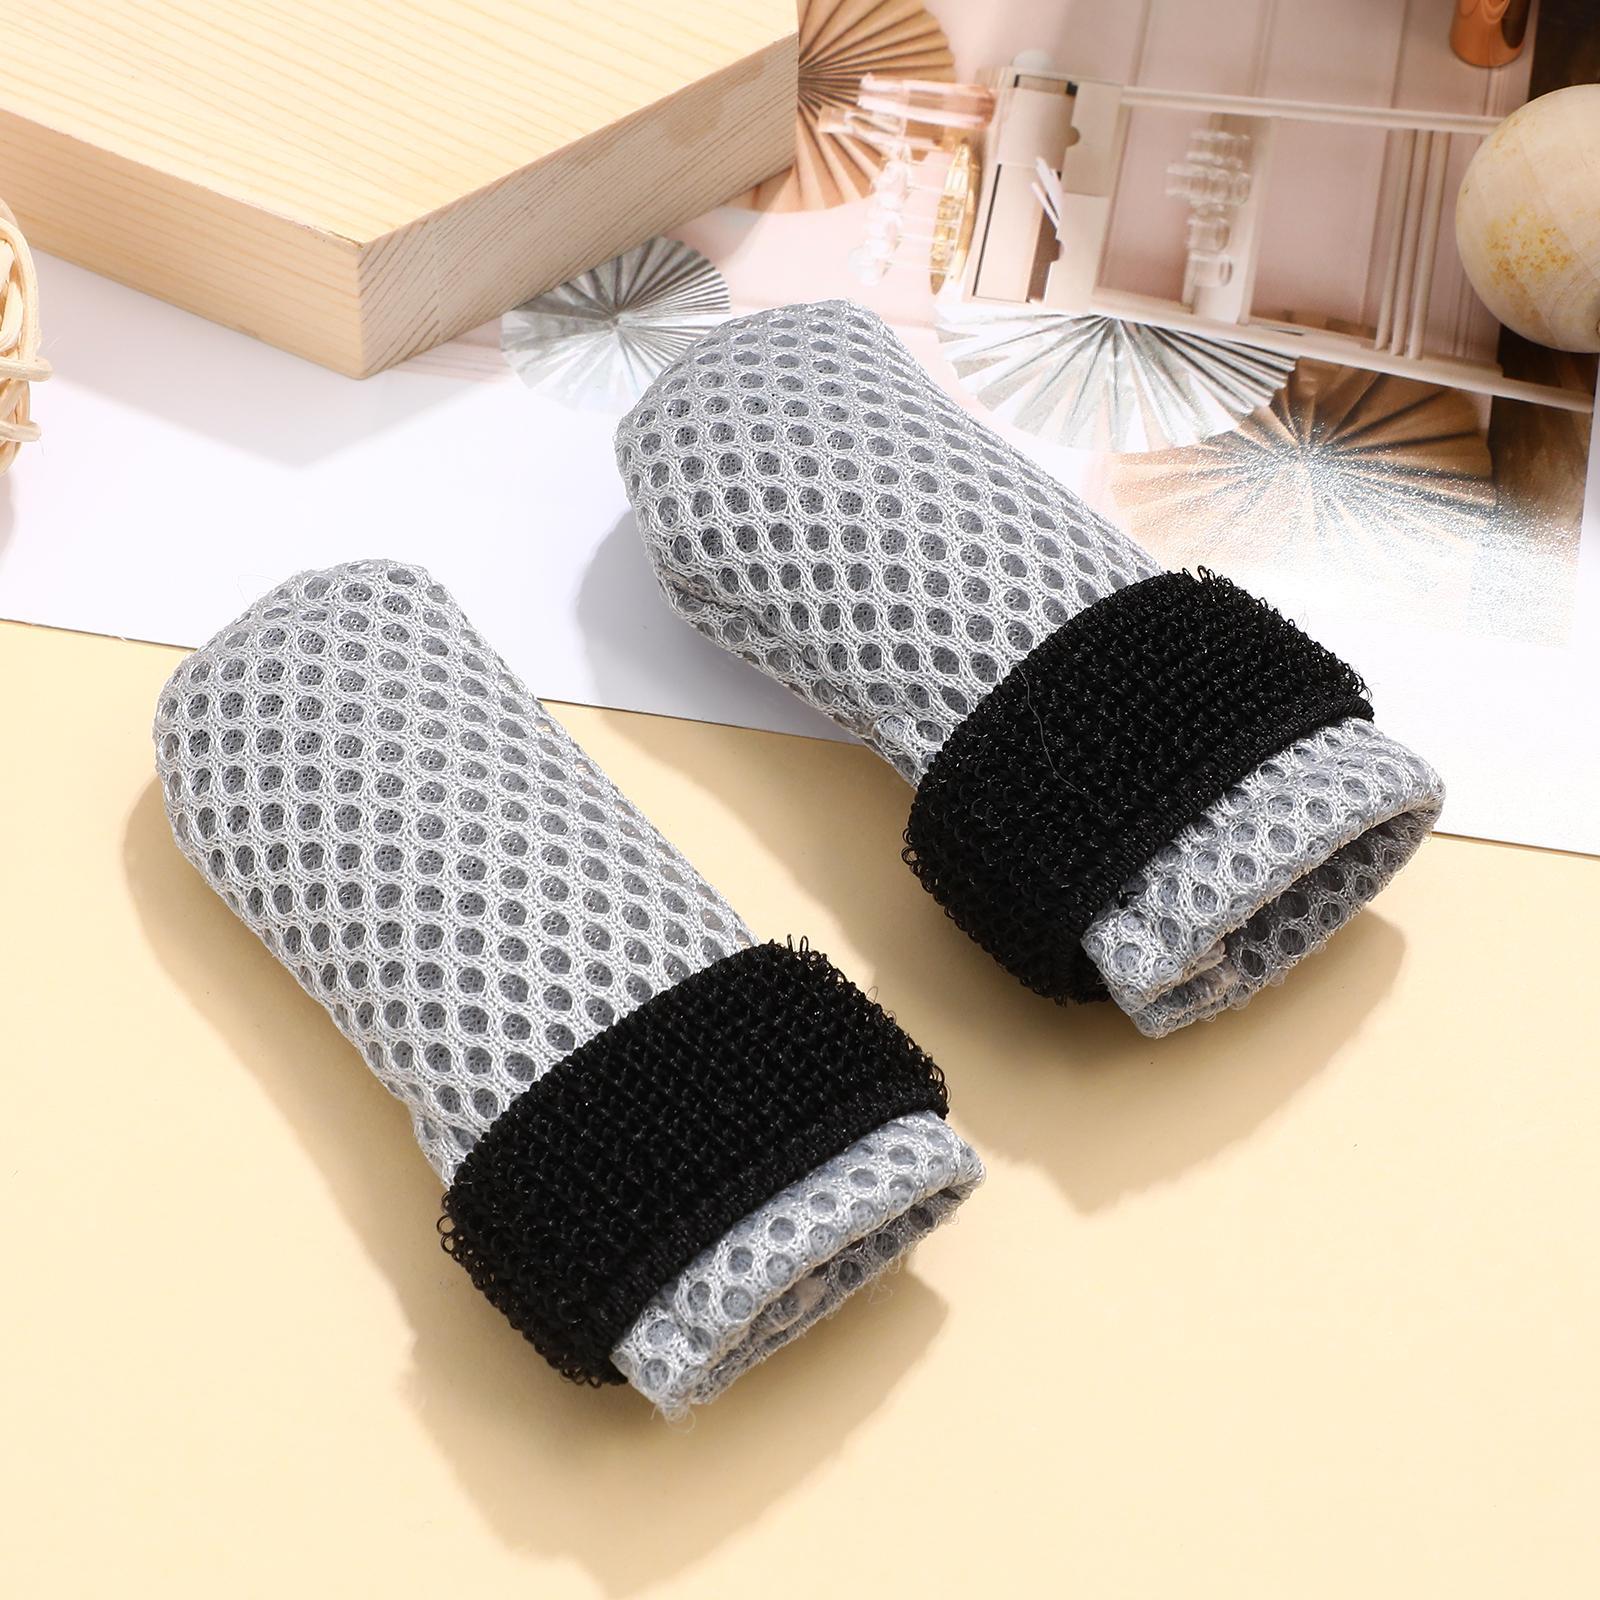 4 Pcs Cat Foot Covers Anti-Scratch Cat Feet Covers Kitten Paw Sleeves Cat Boots Shoes Socks Claw Caps